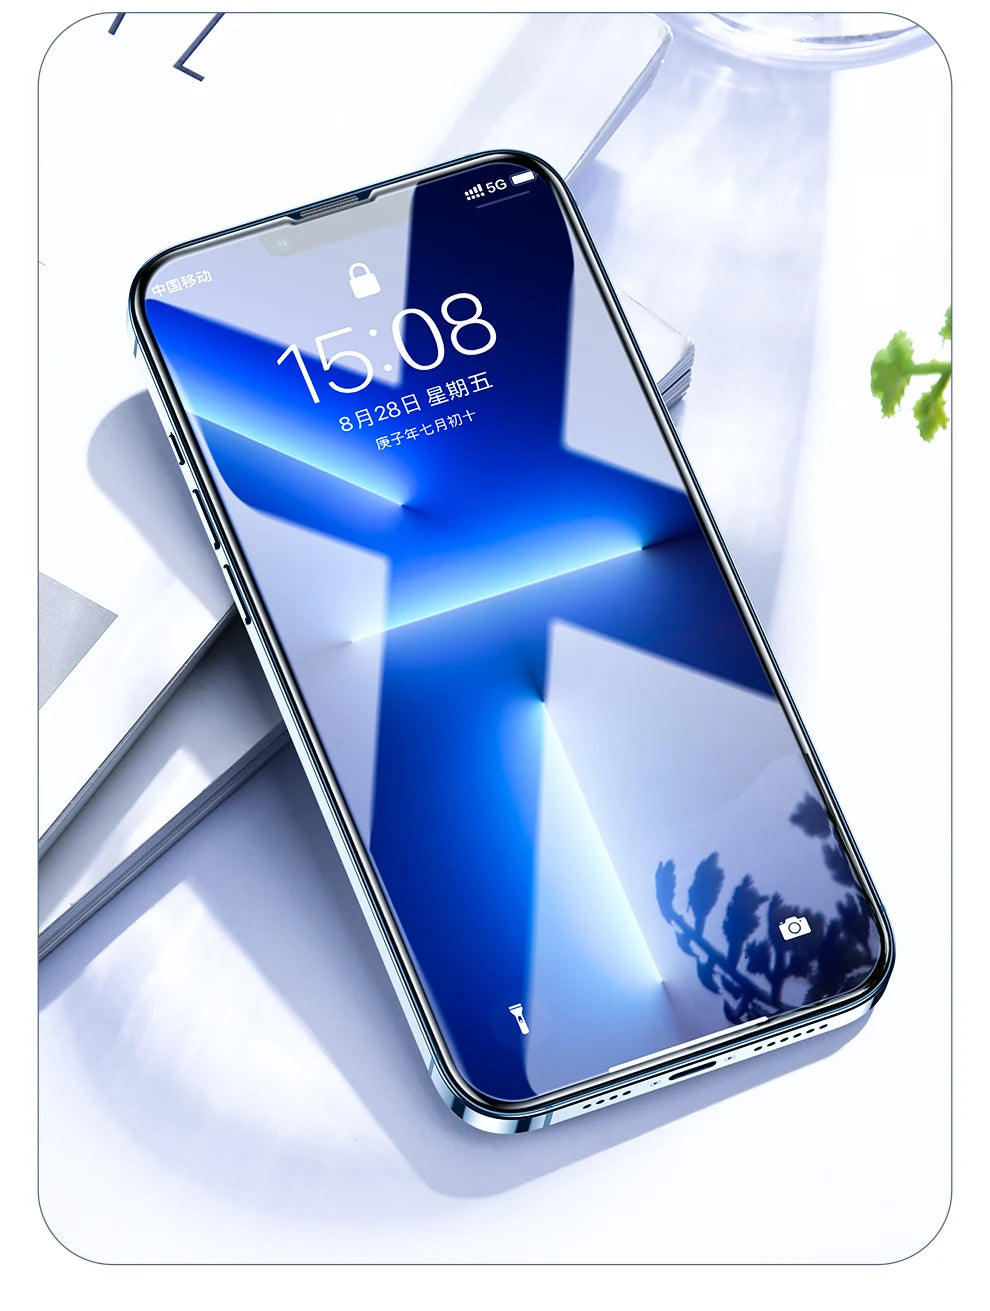 Soft Edg Screen Protector For iPhone 13 Pro Max Tempered Glass For iPhone 13 mini Protective Glass HD Anti Blue Light